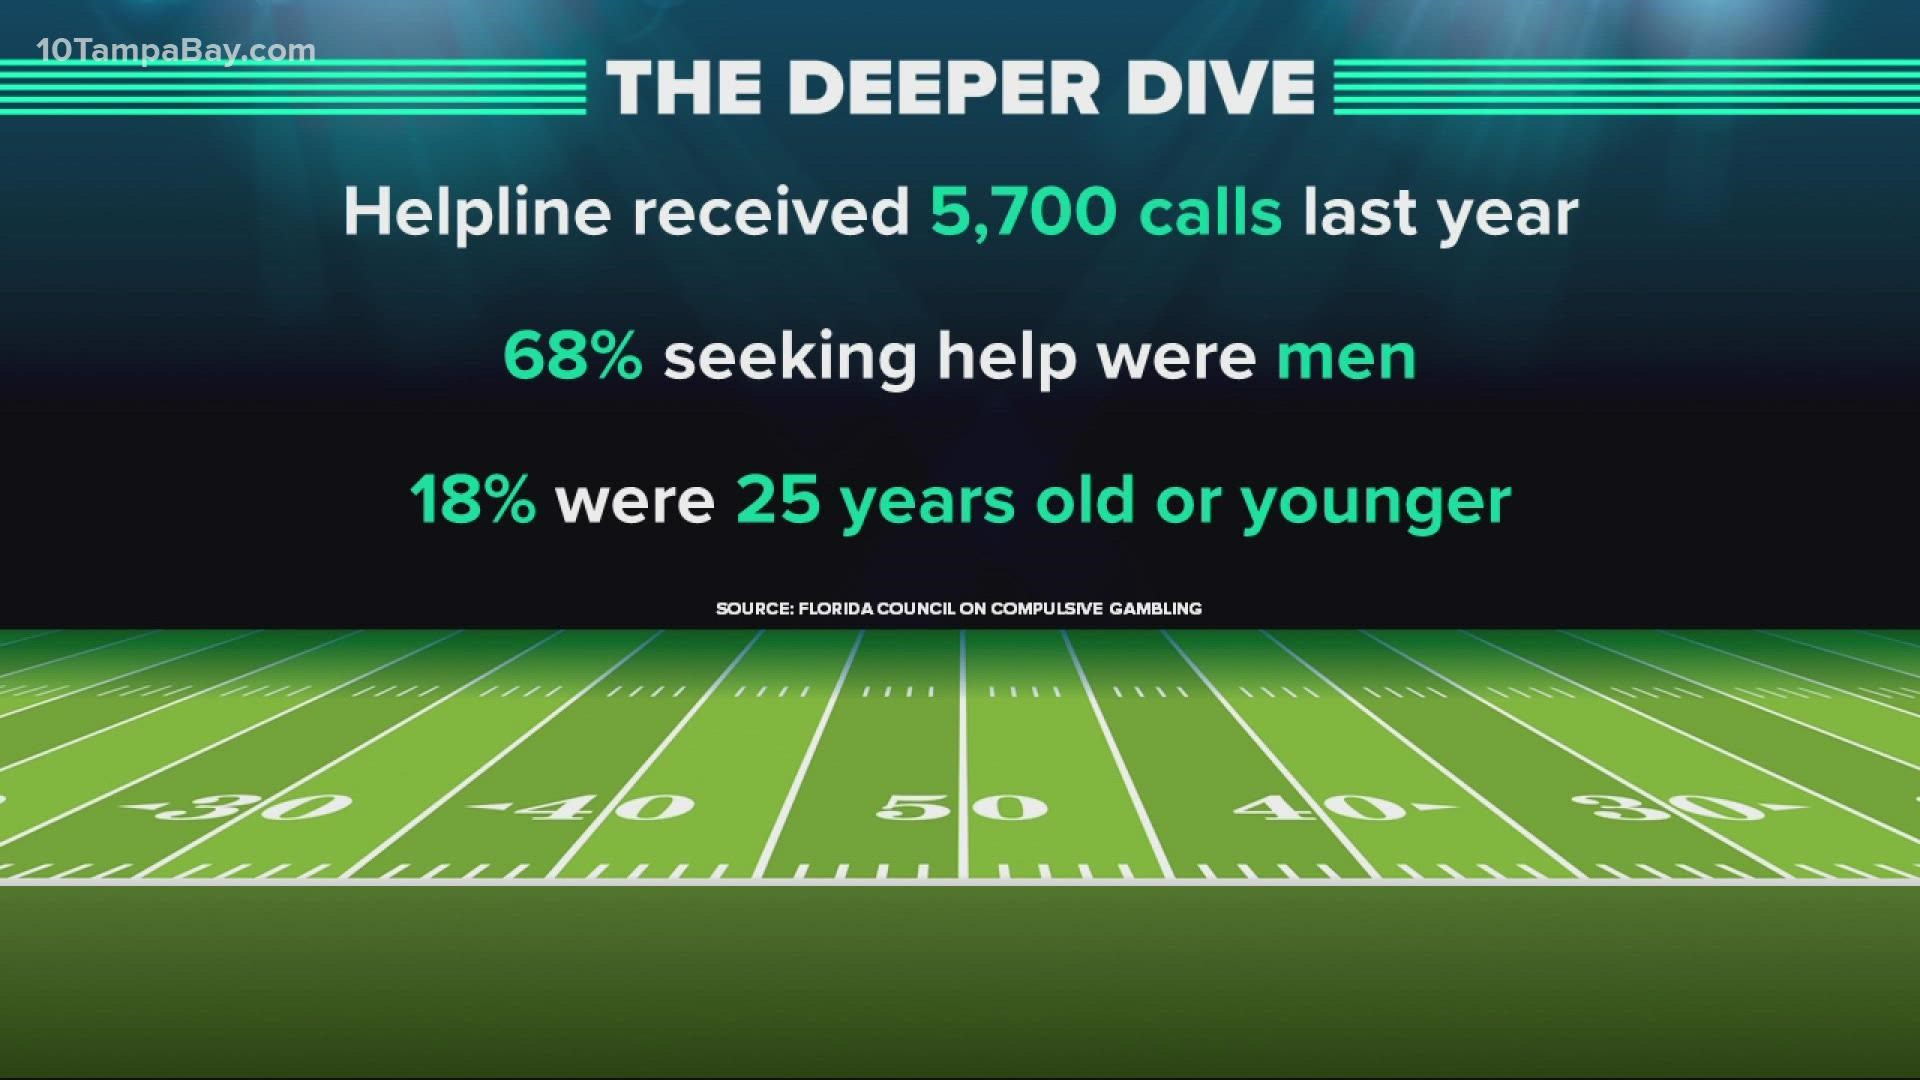 Will the big game be a big problem for young men?